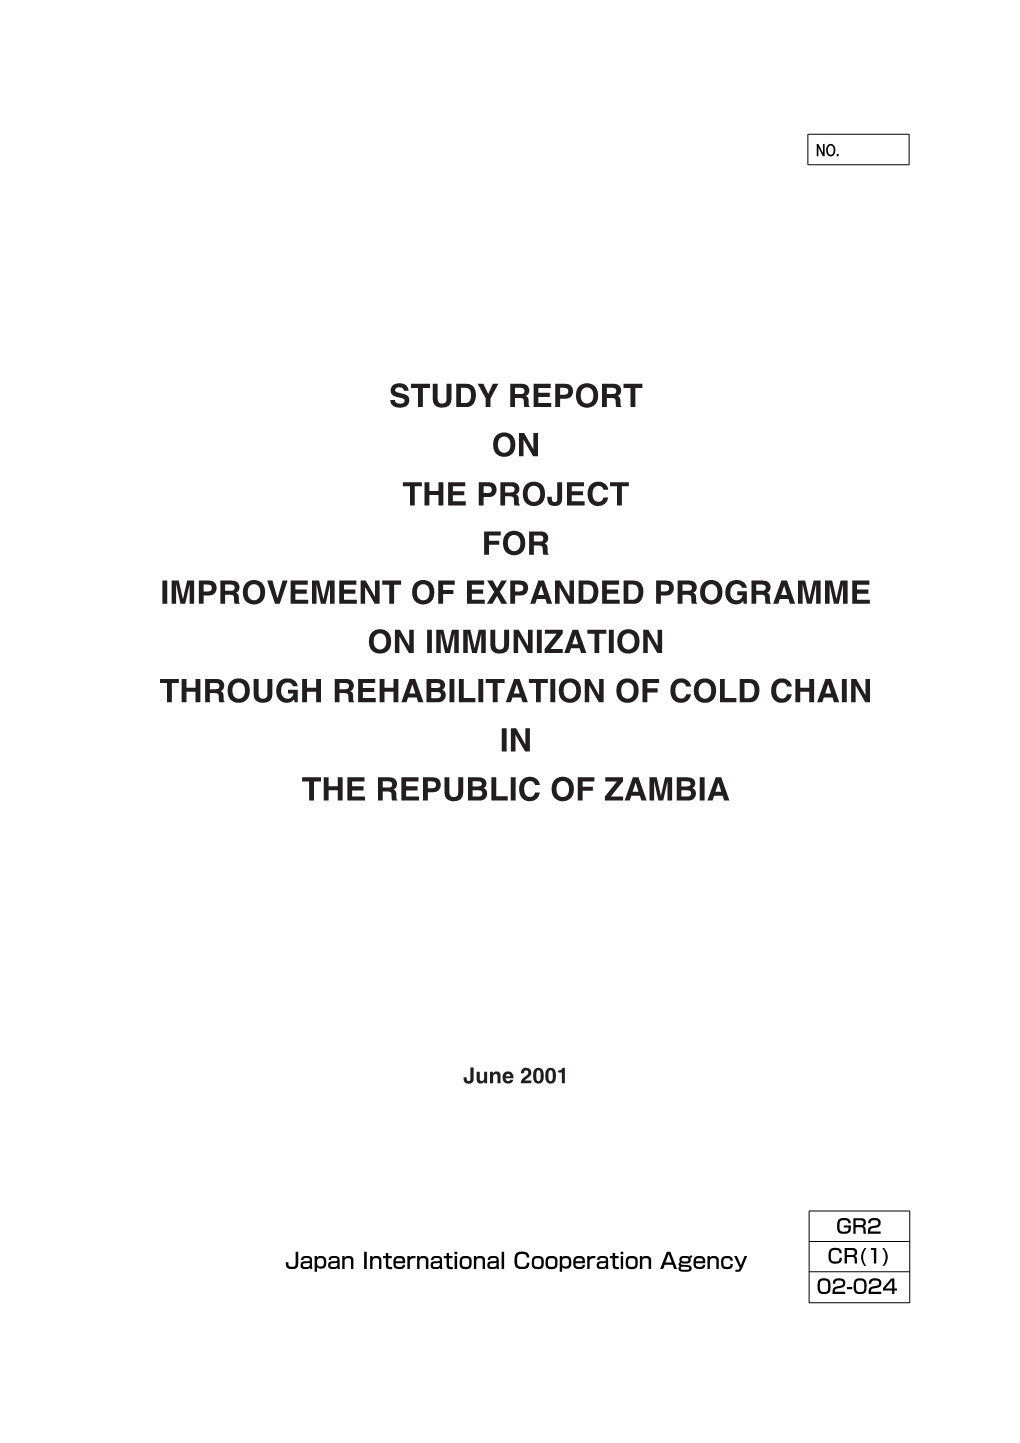 Study Report on the Project for Improvement of Expanded Programme on Immunization Through Rehabilitation of Cold Chain in the Republic of Zambia